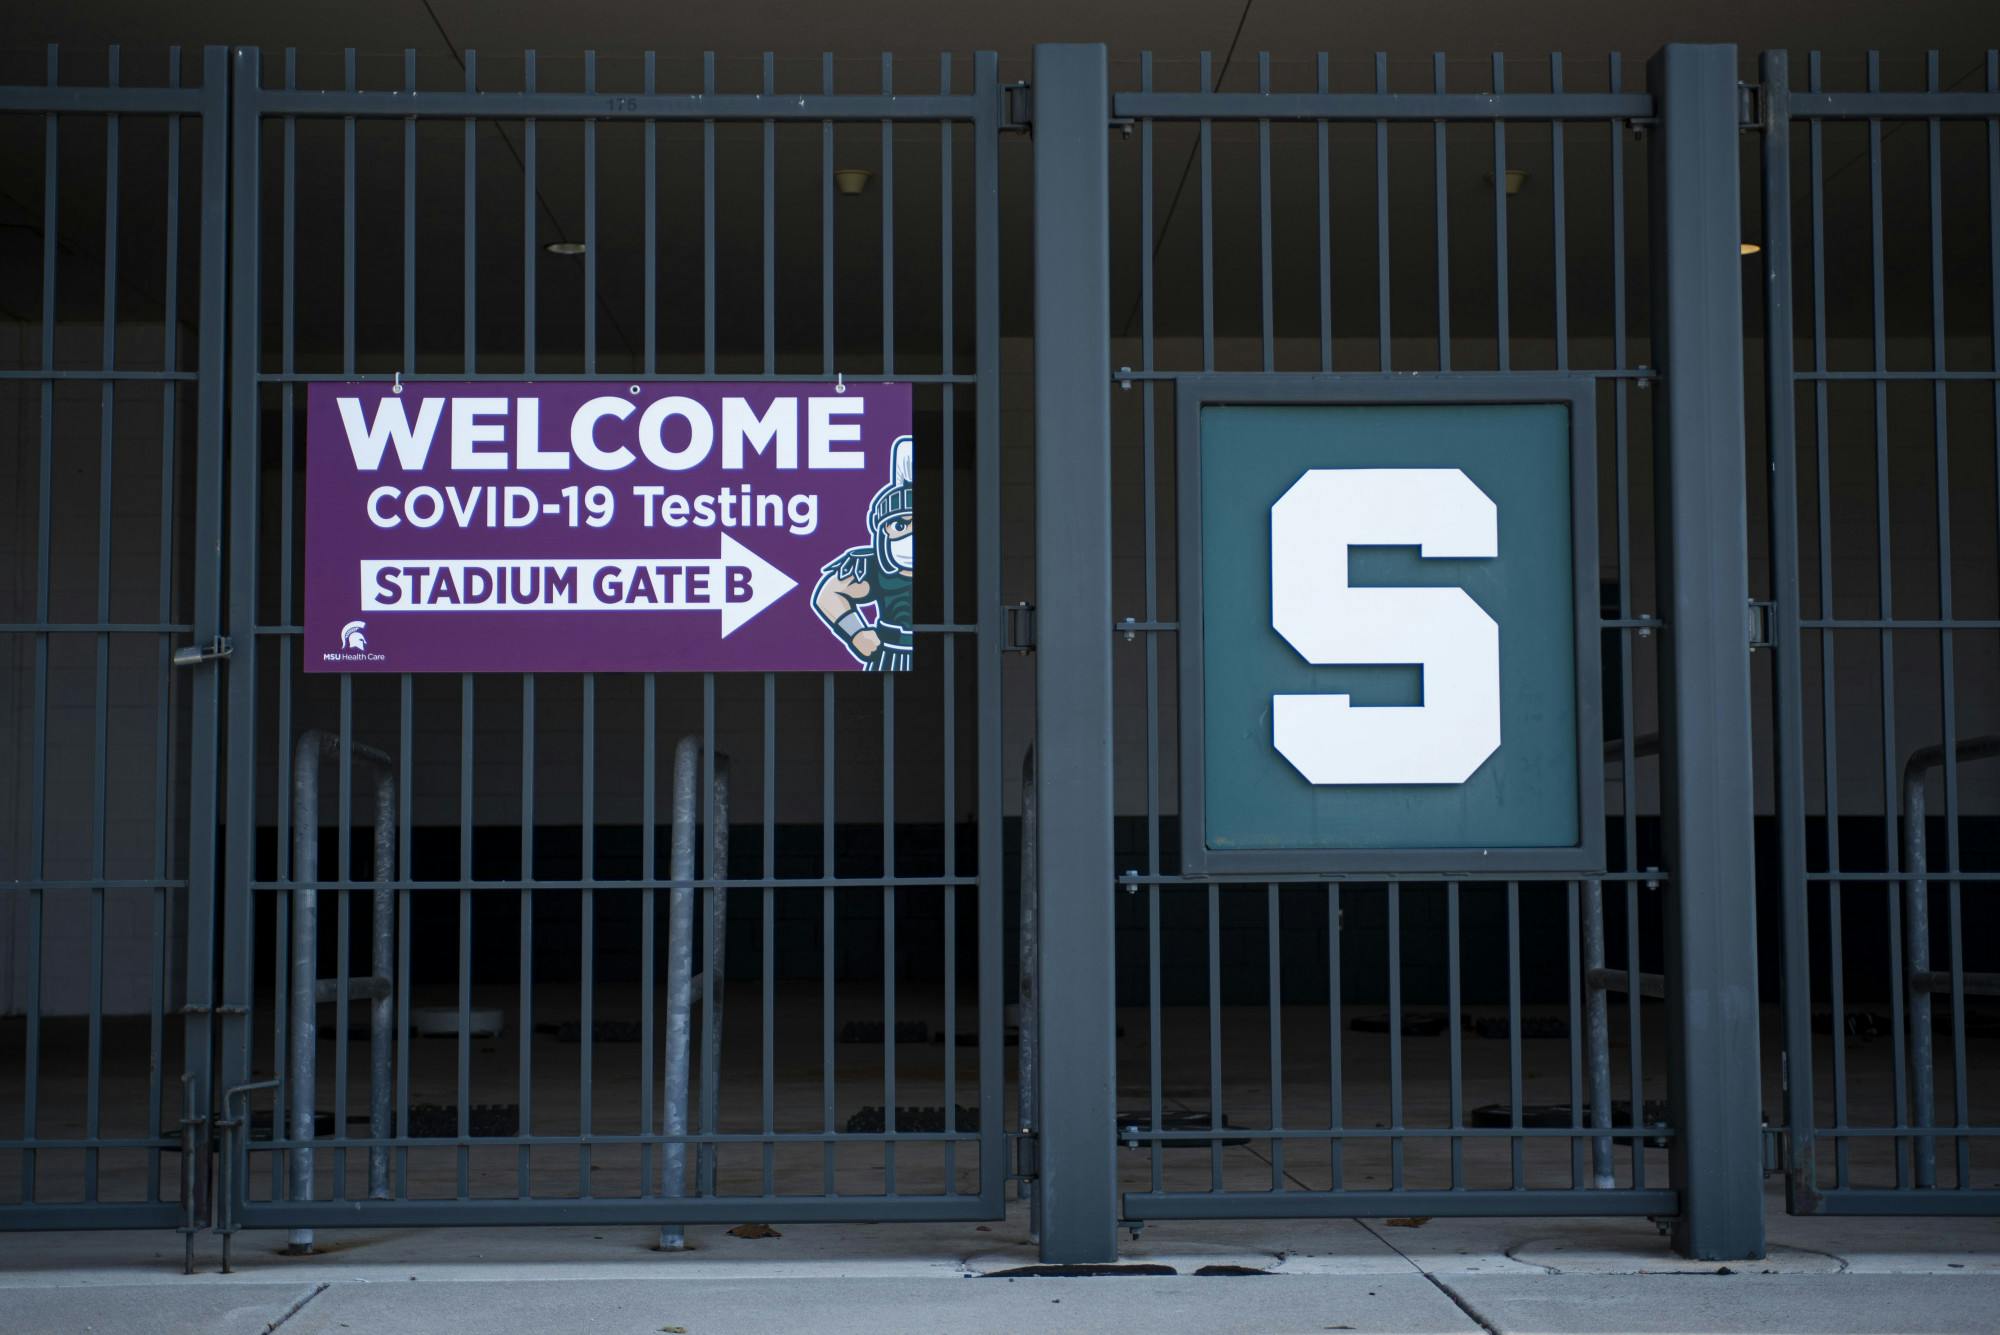 Spartan Stadium has converted into a COVID-19 testing facility to allow students living on or near campus to get tested. The entrance to the testing center is located at Gate B. Shot on September 23, 2020.